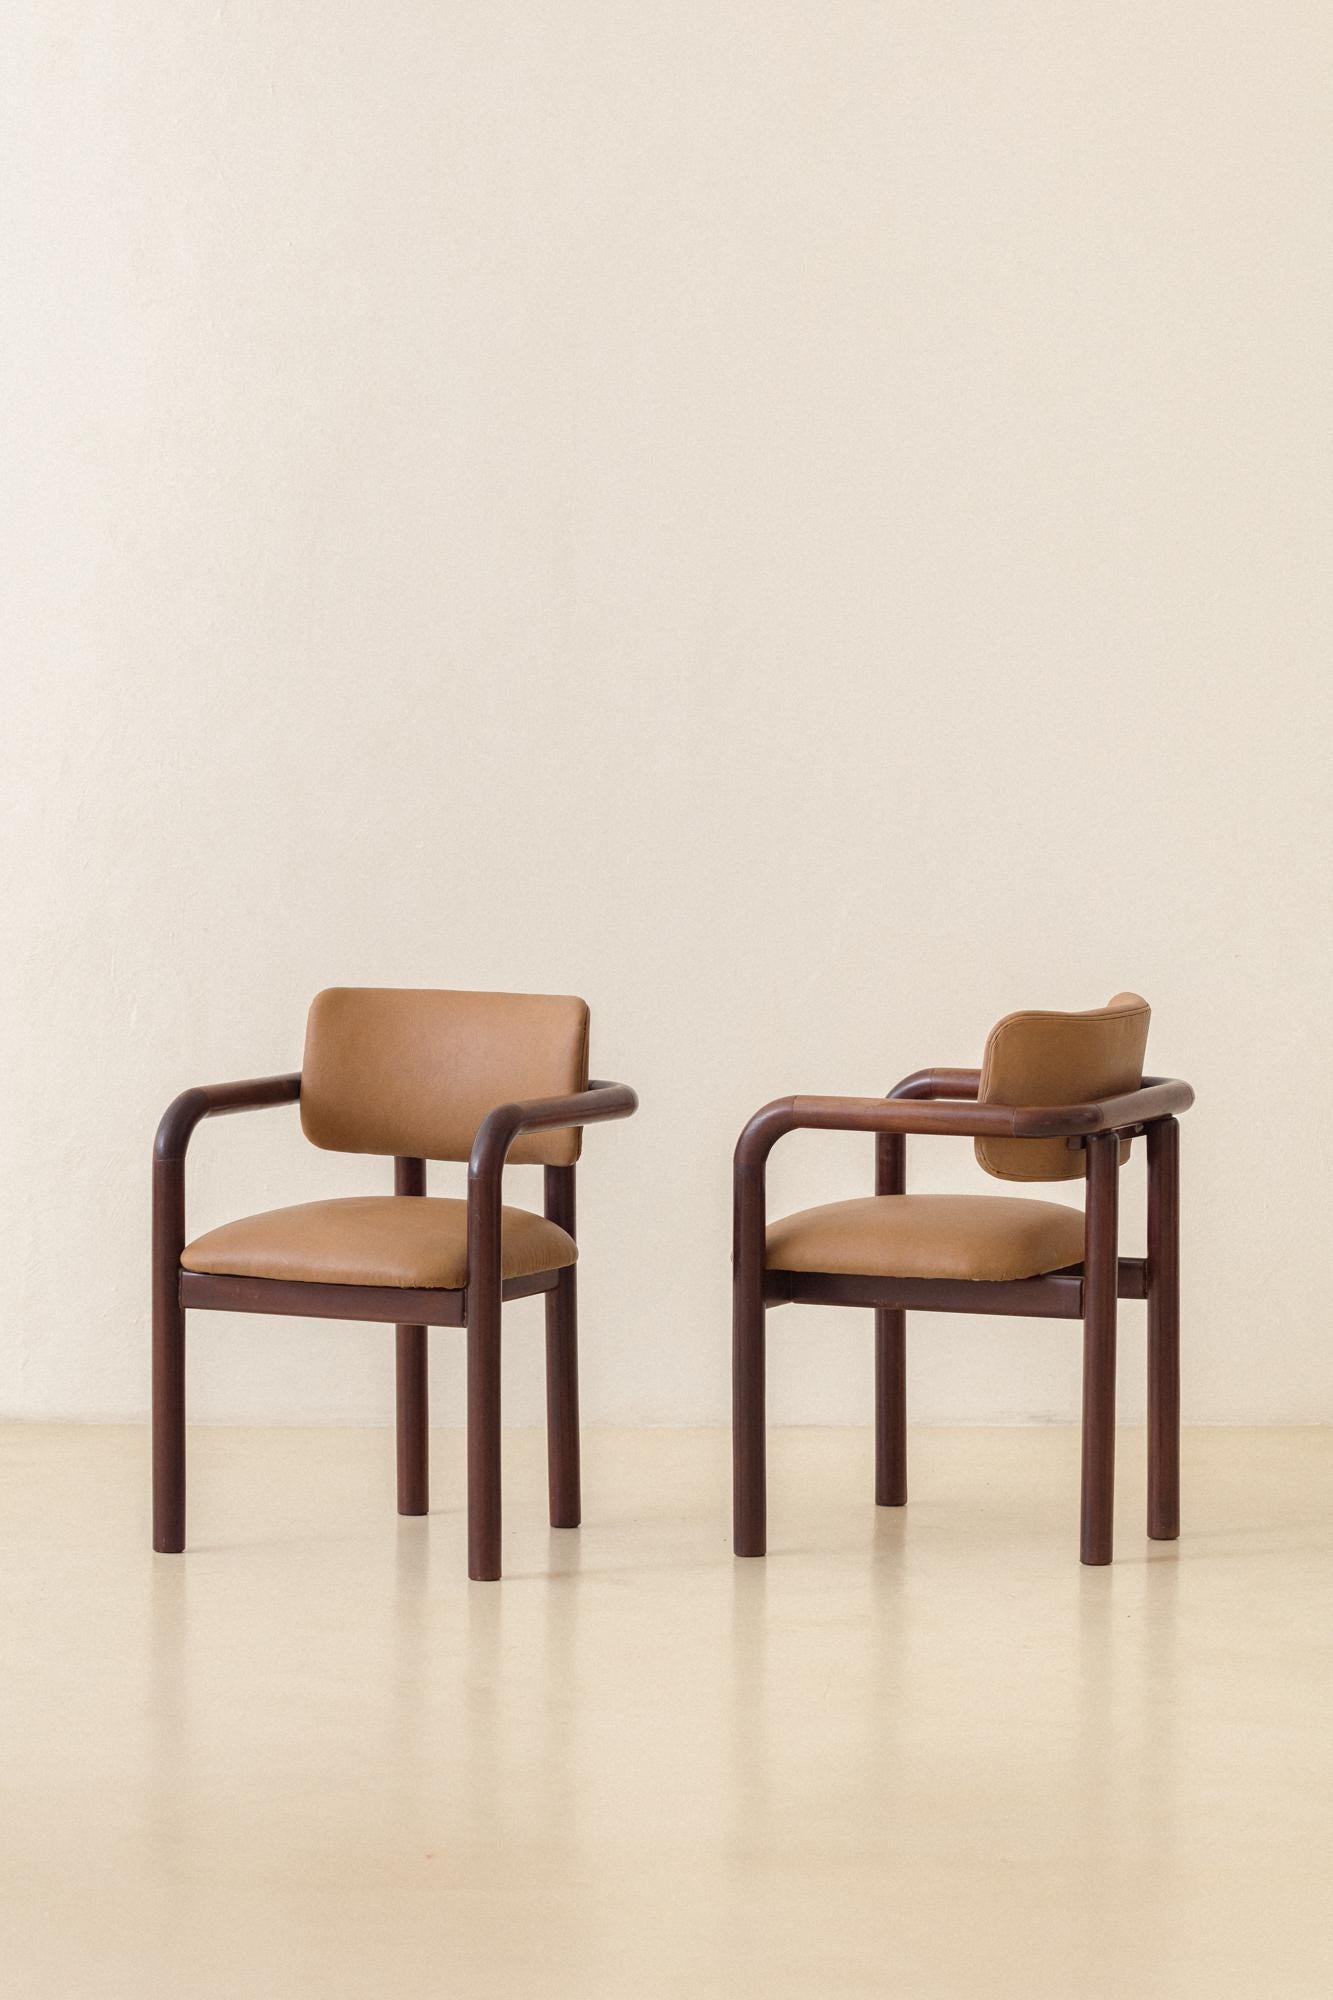 Brazilian Midcentury Design, Solid Imbuia Dining Chairs with Armrests, 1950s For Sale 2